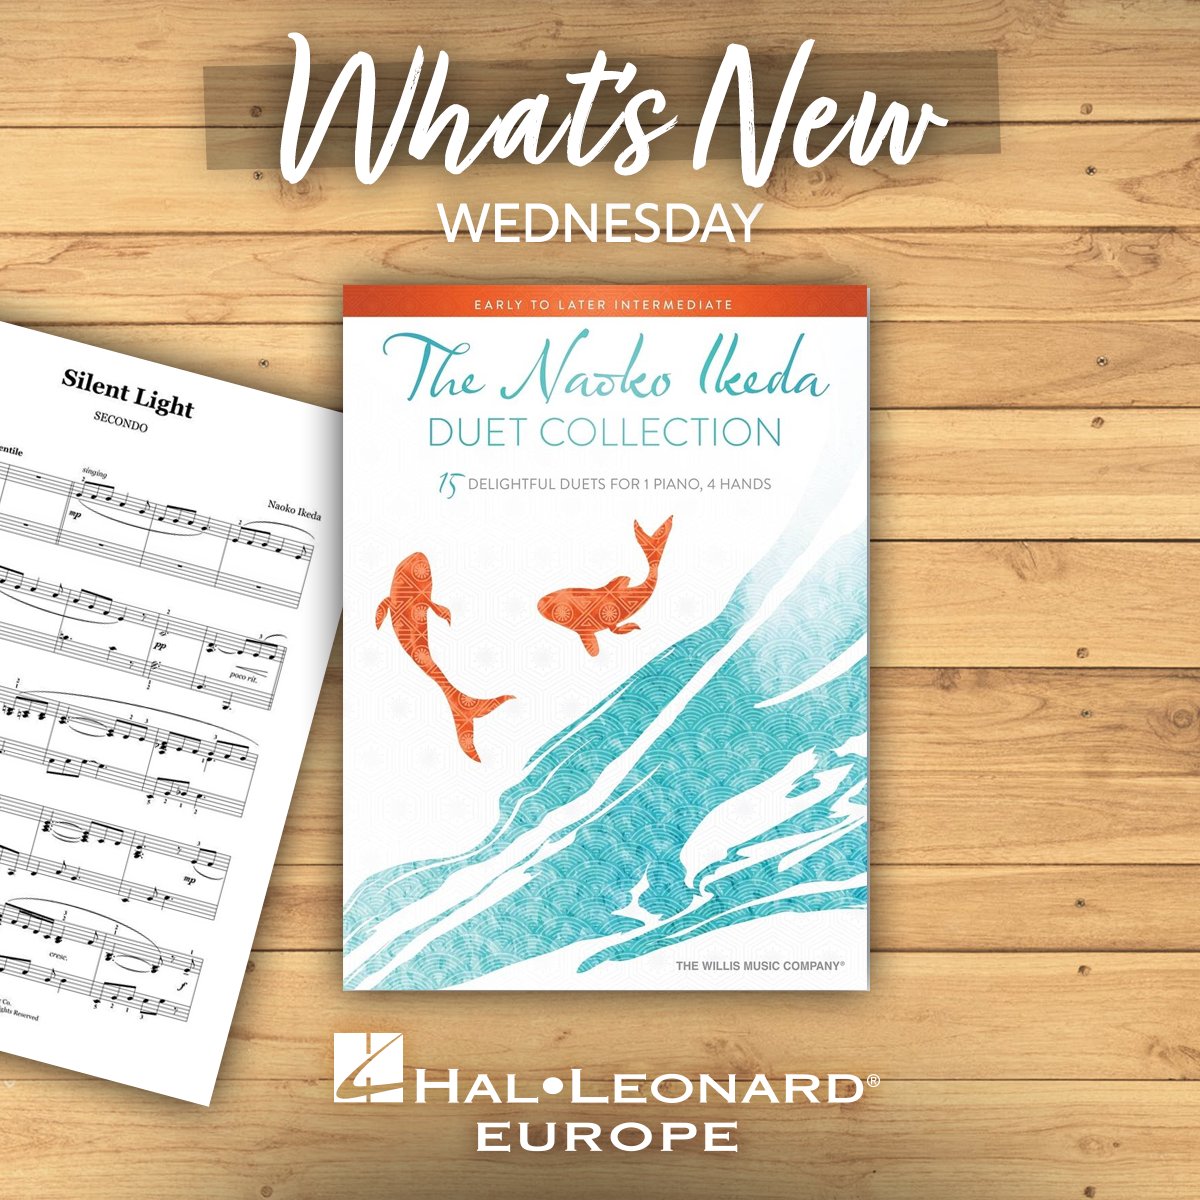 For May Day, our #WhatsNewWednesday release is The Naoko Ikeda Duet Collection! 🐠🌊🇯🇵

Published by @WillisPianoFeaturing, read about Ikeda's most beloved intermediate duets for one piano, four hands, in the image description. Available online and in your local music stores!